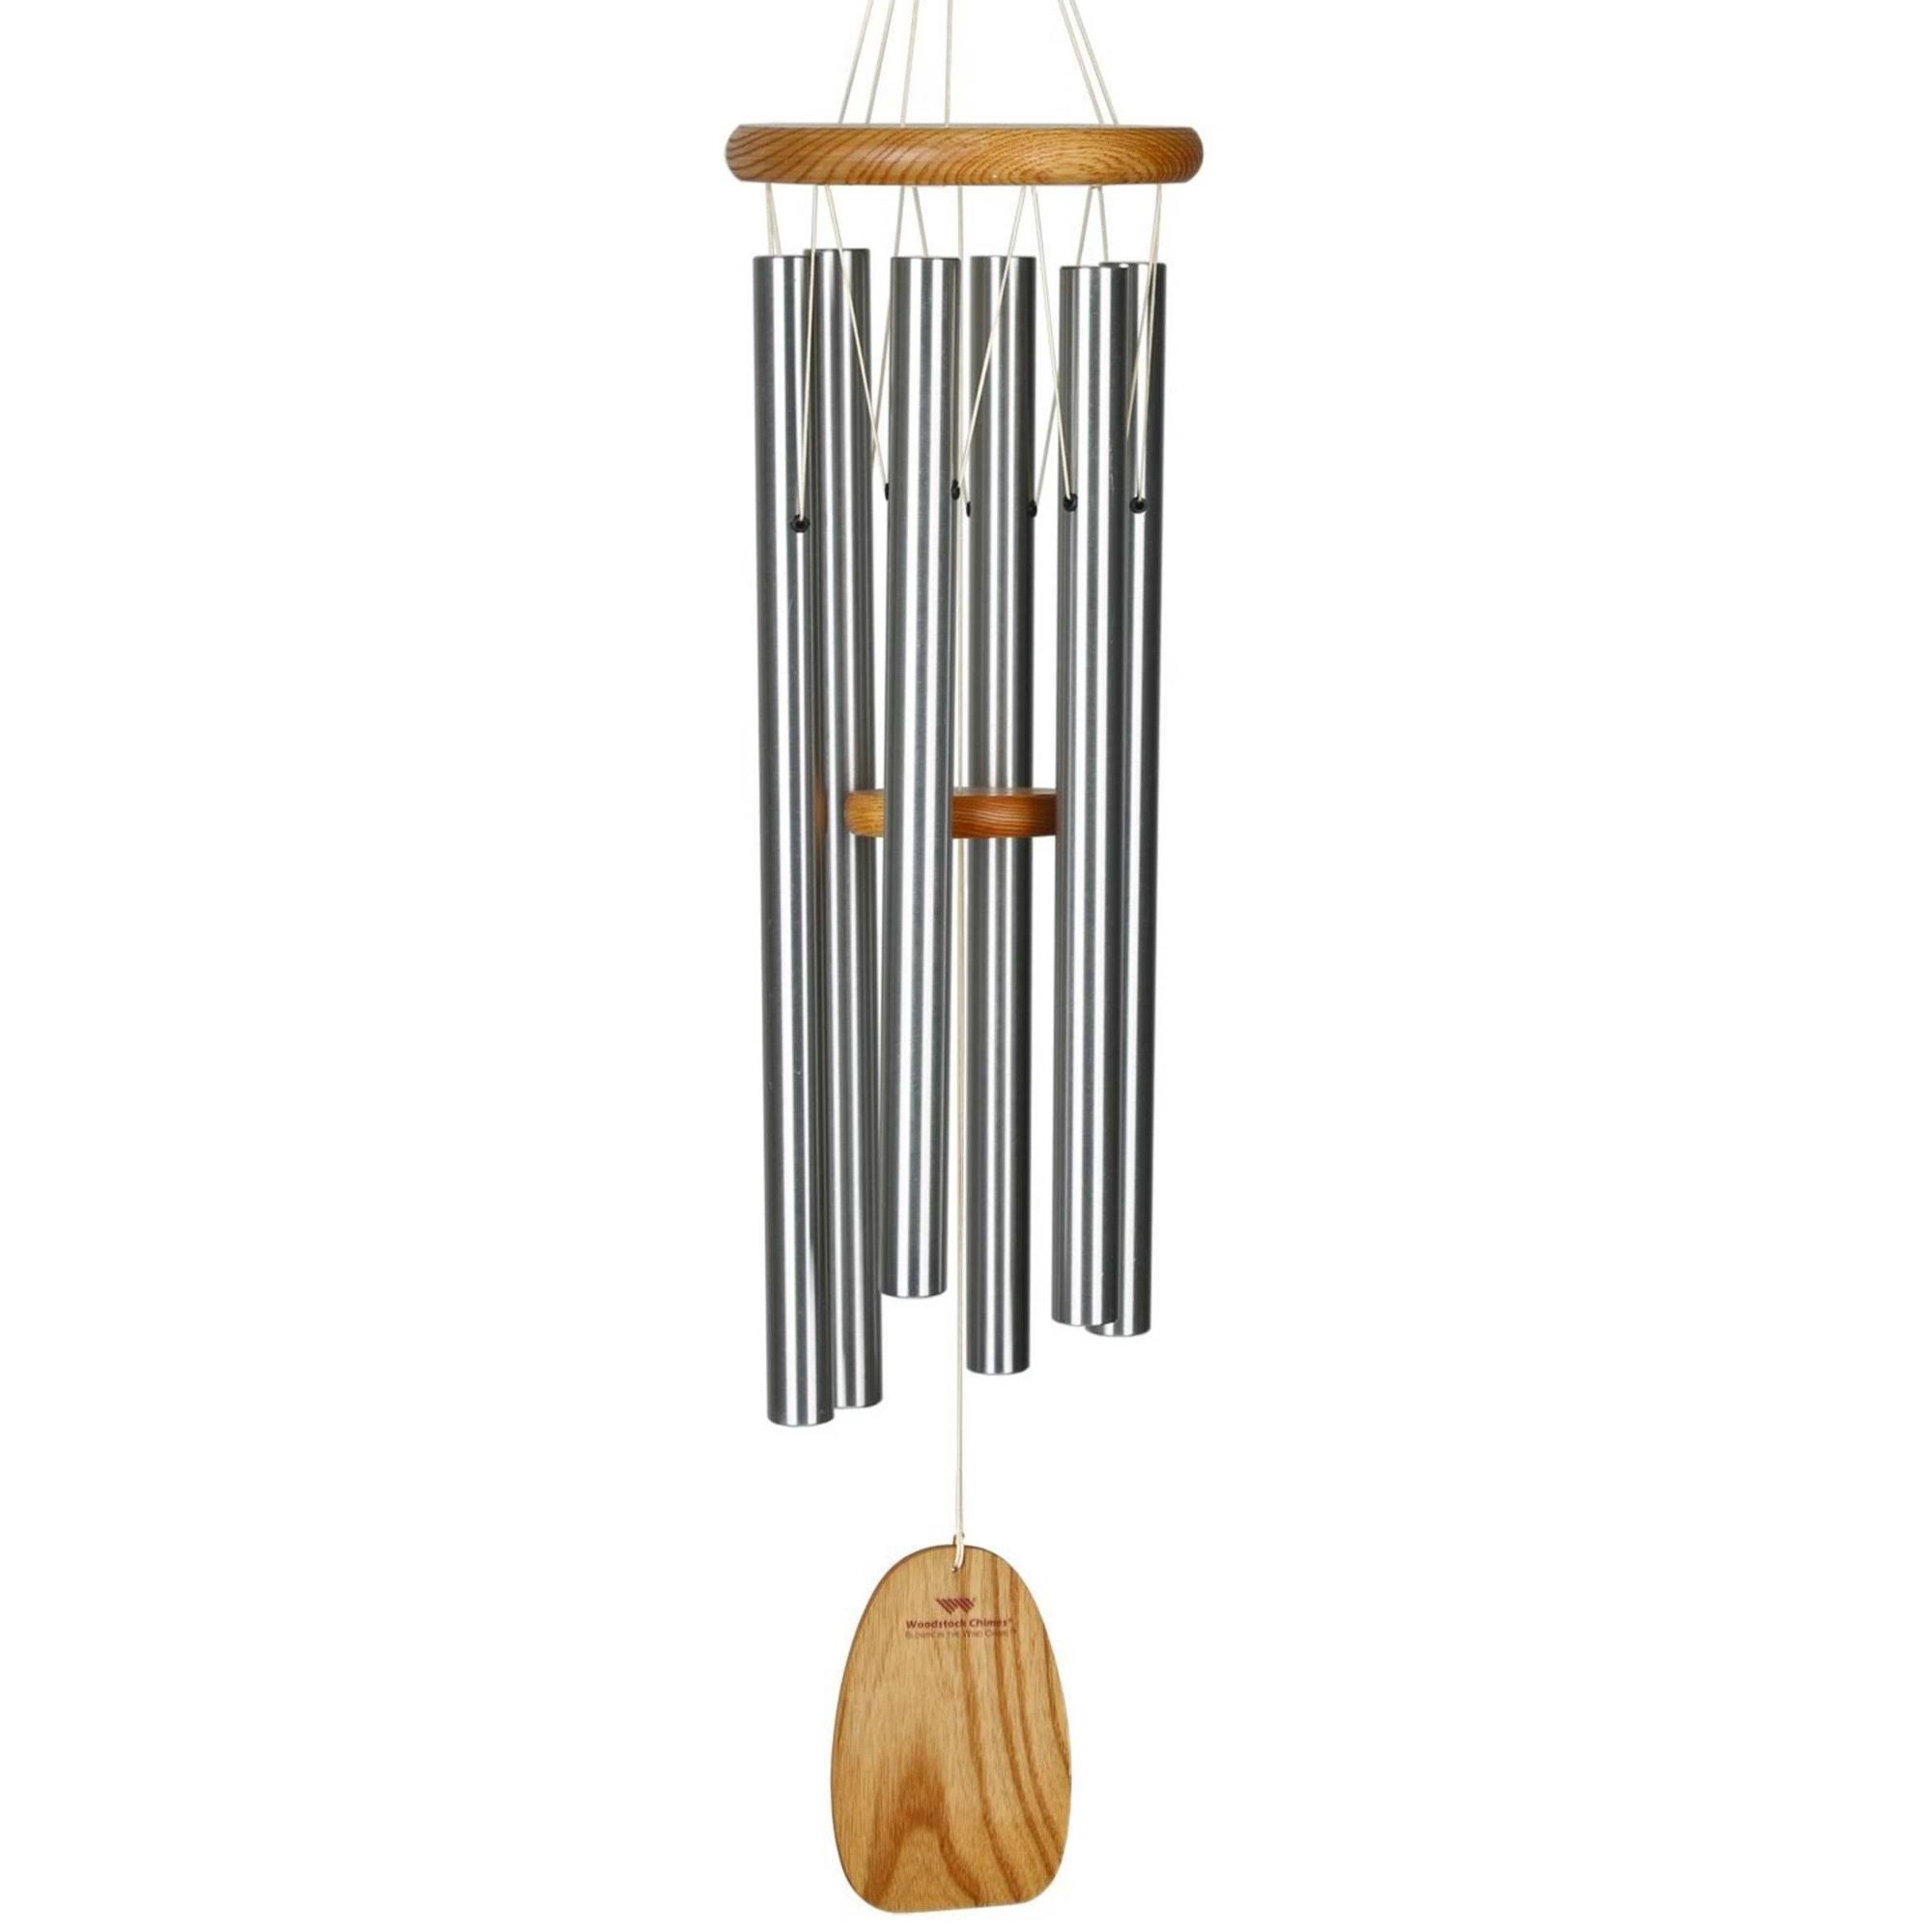 Woodstock Chimes Blowin' In The Wind Chime